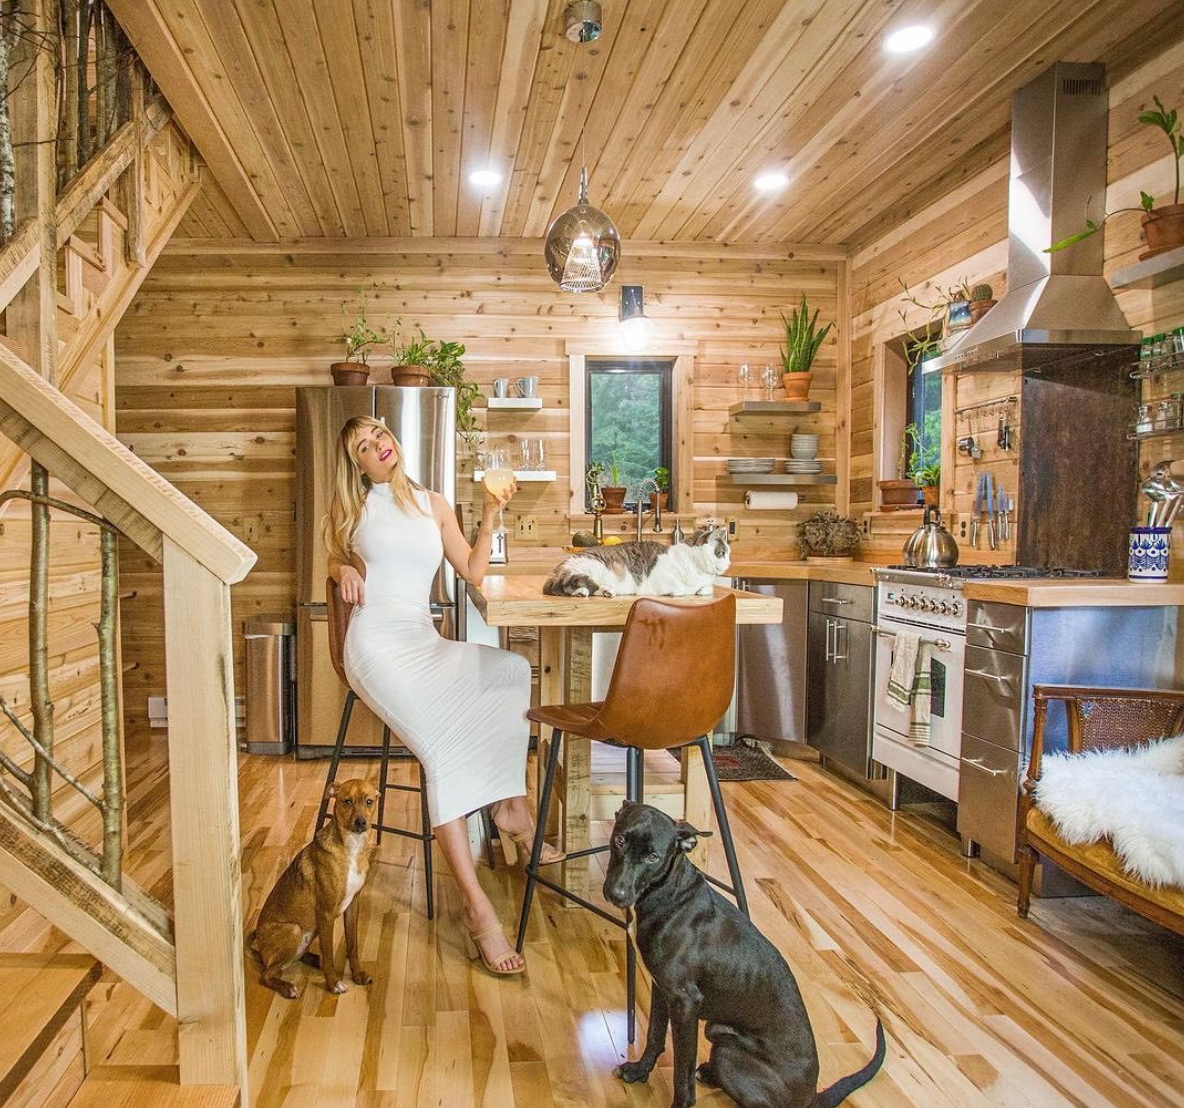 Sara Underwood poses with her dogs inside the fairytale 